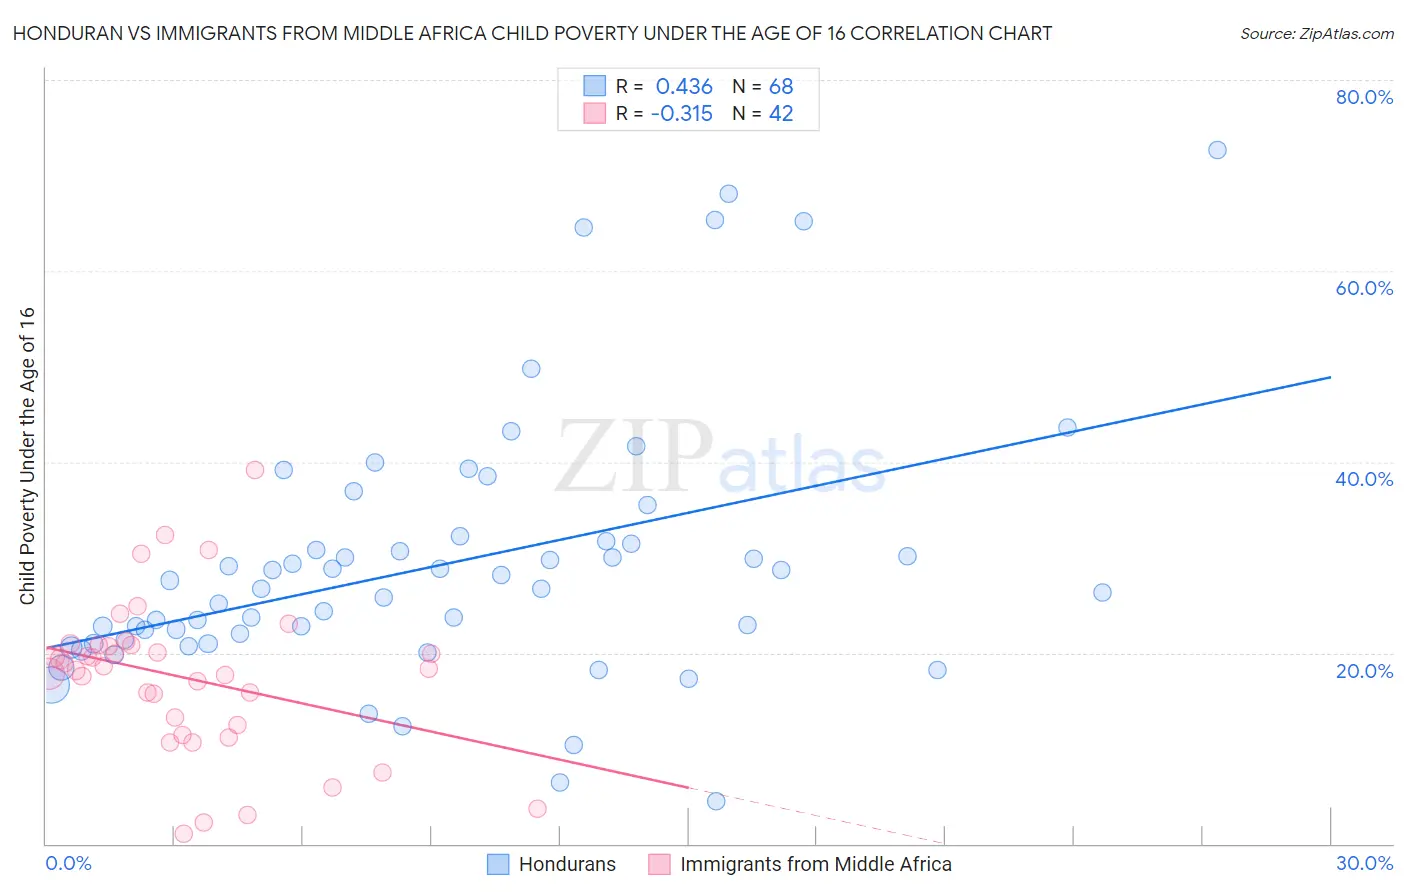 Honduran vs Immigrants from Middle Africa Child Poverty Under the Age of 16